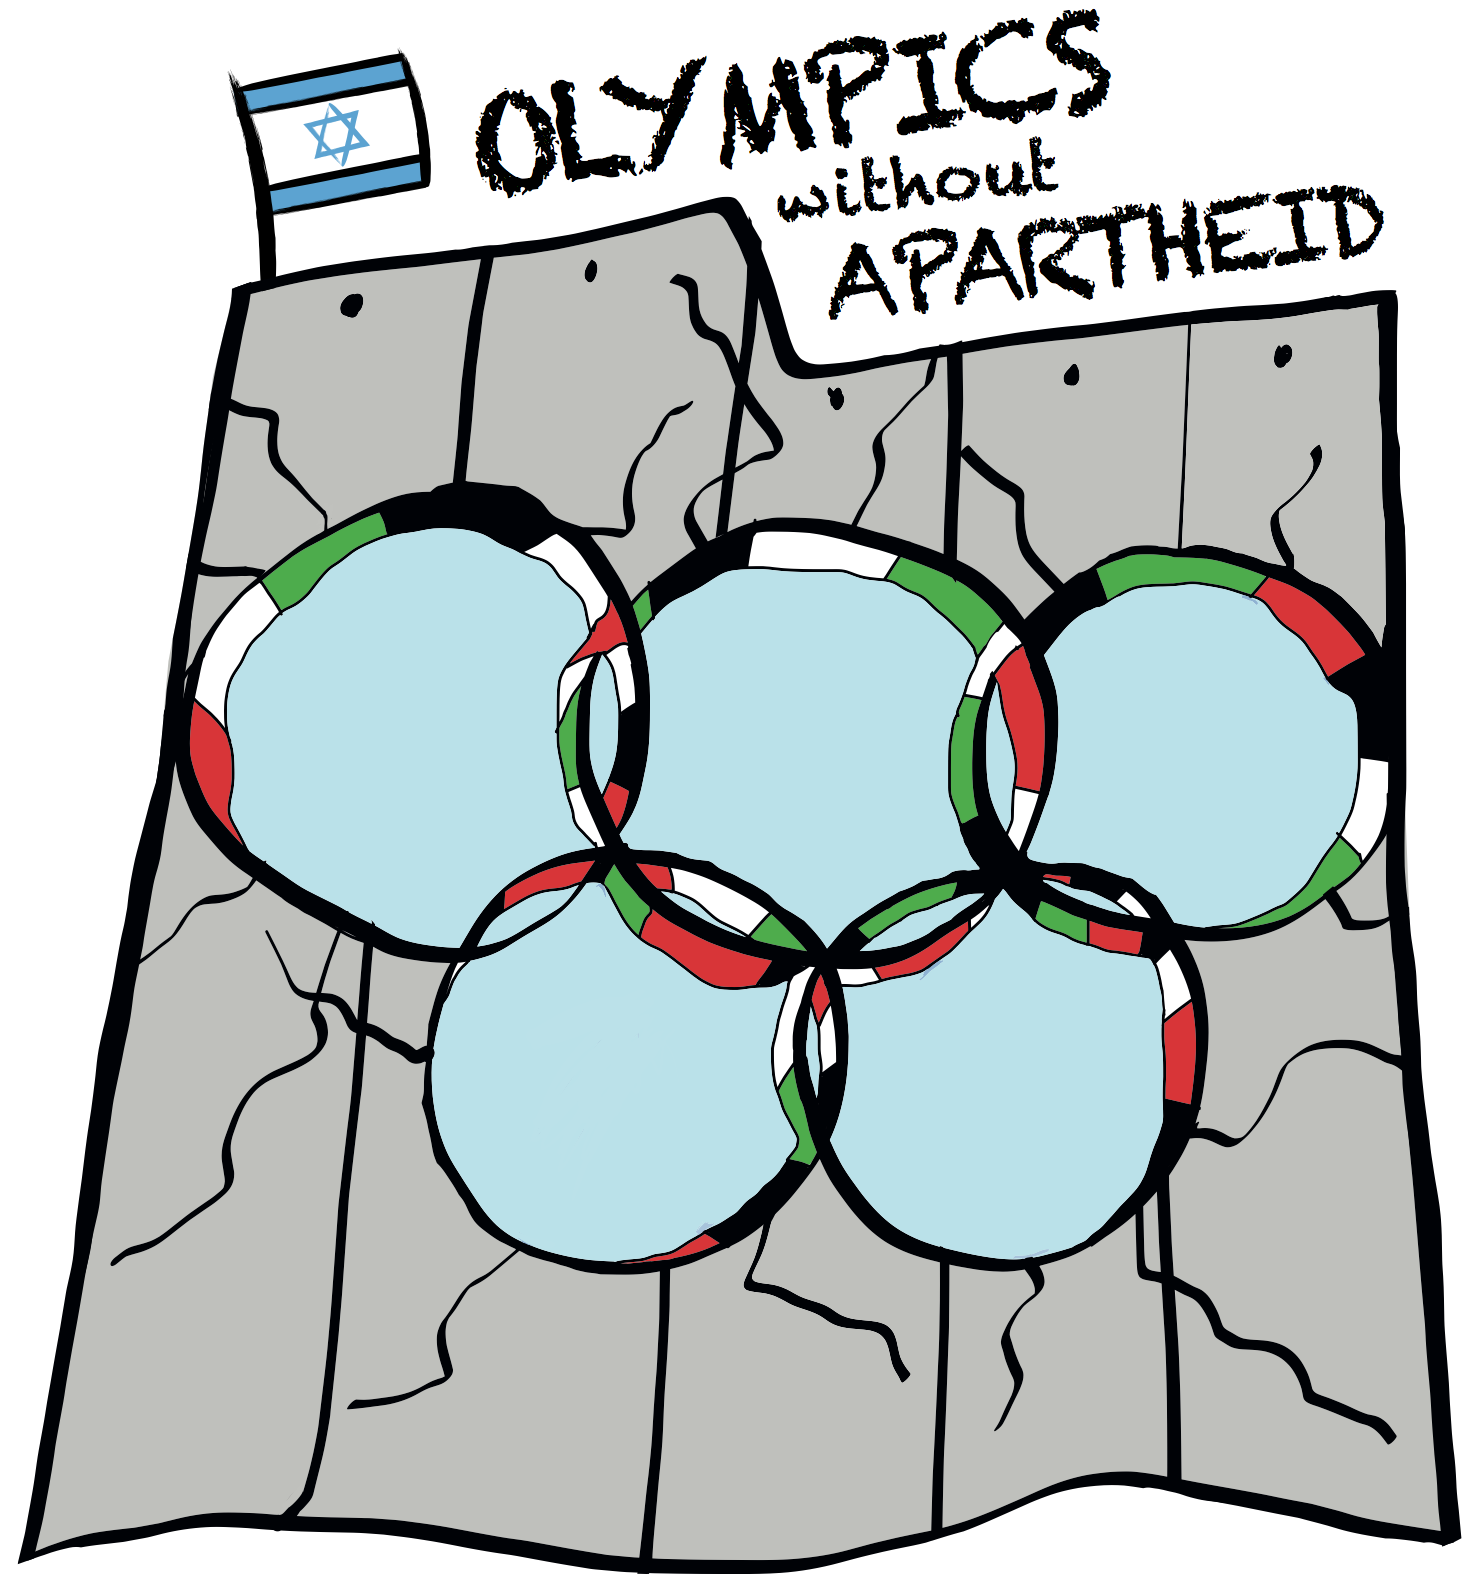 Join us: Olympics without Apartheid!